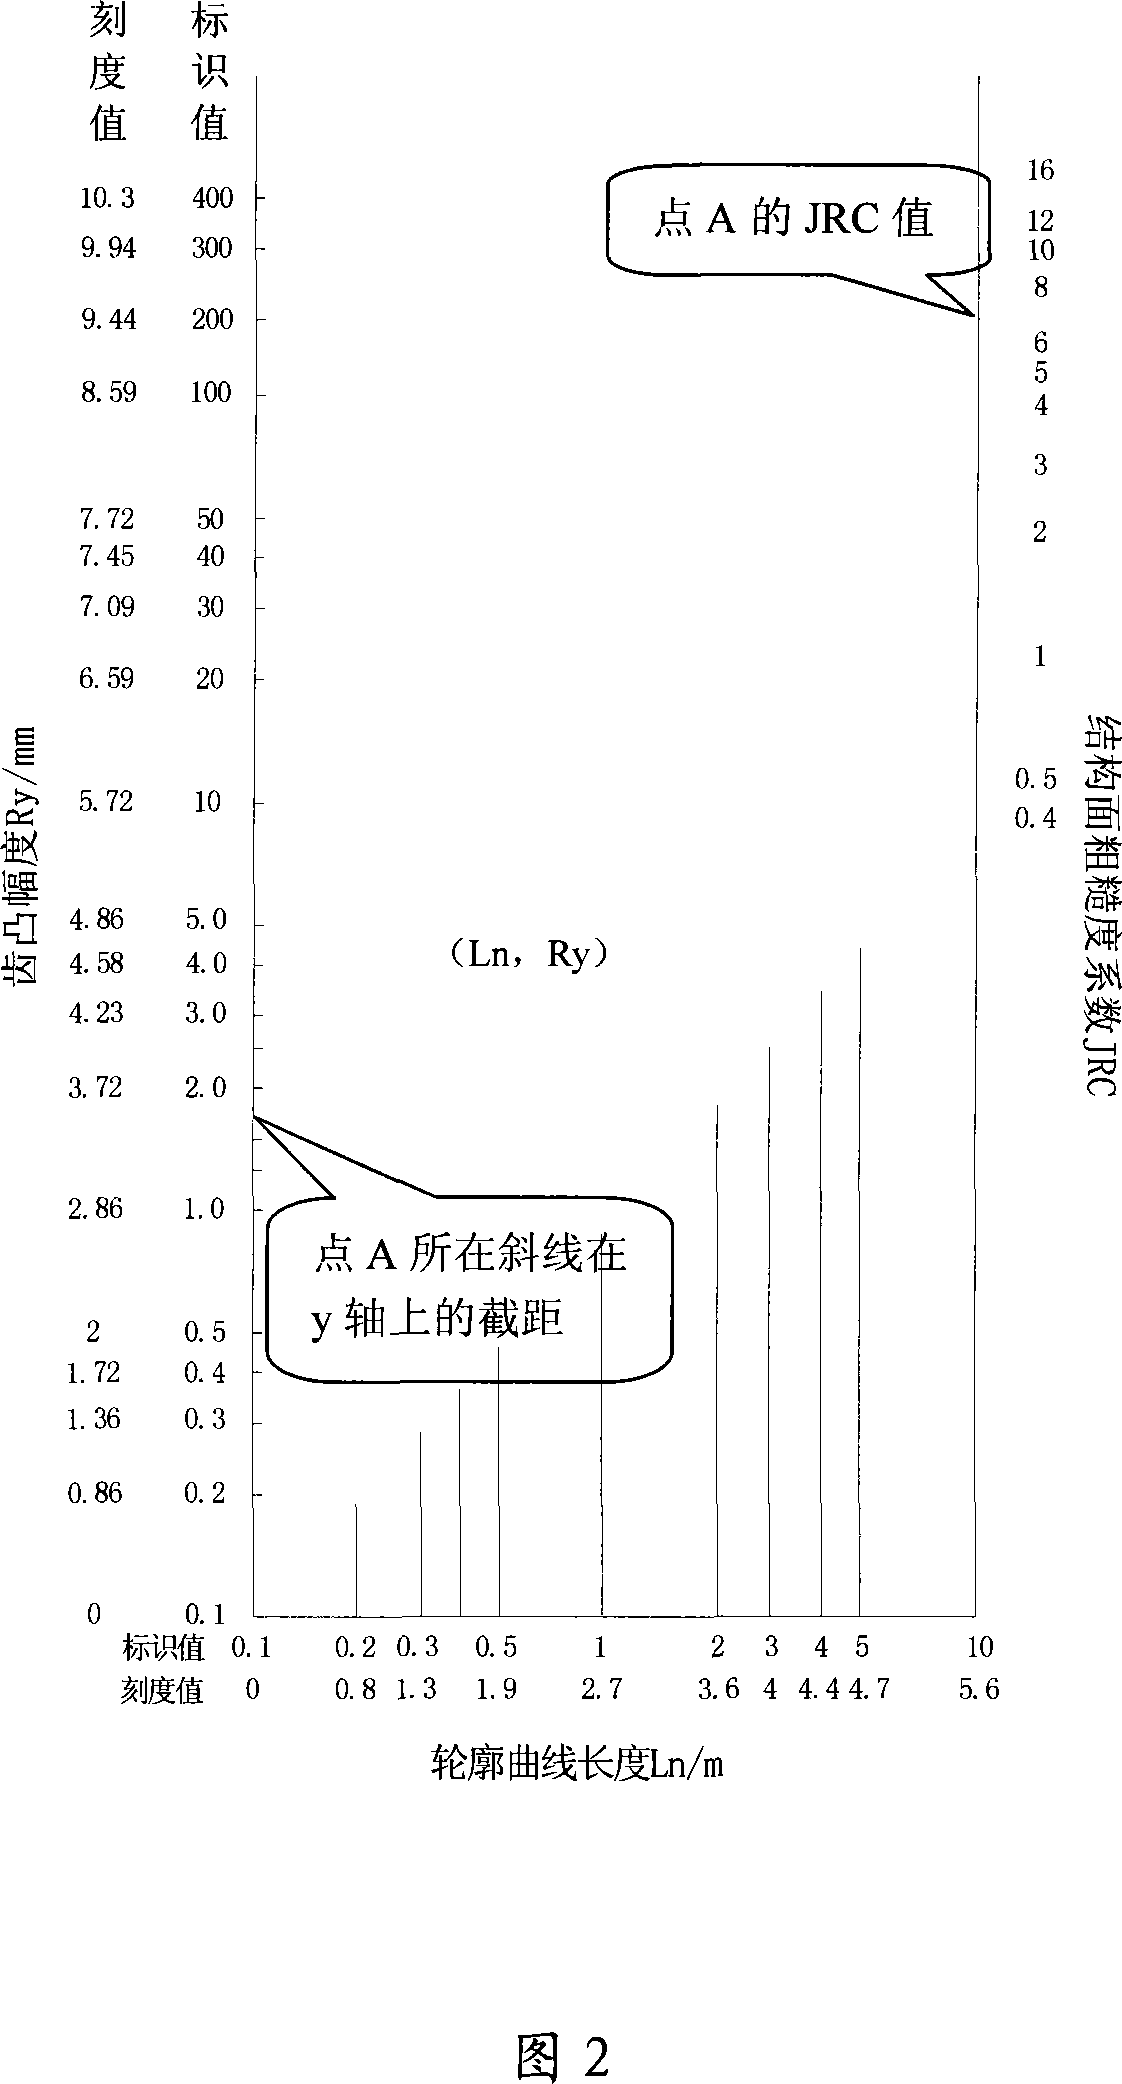 Simple measurement method for rock structural plane roughness coefficient